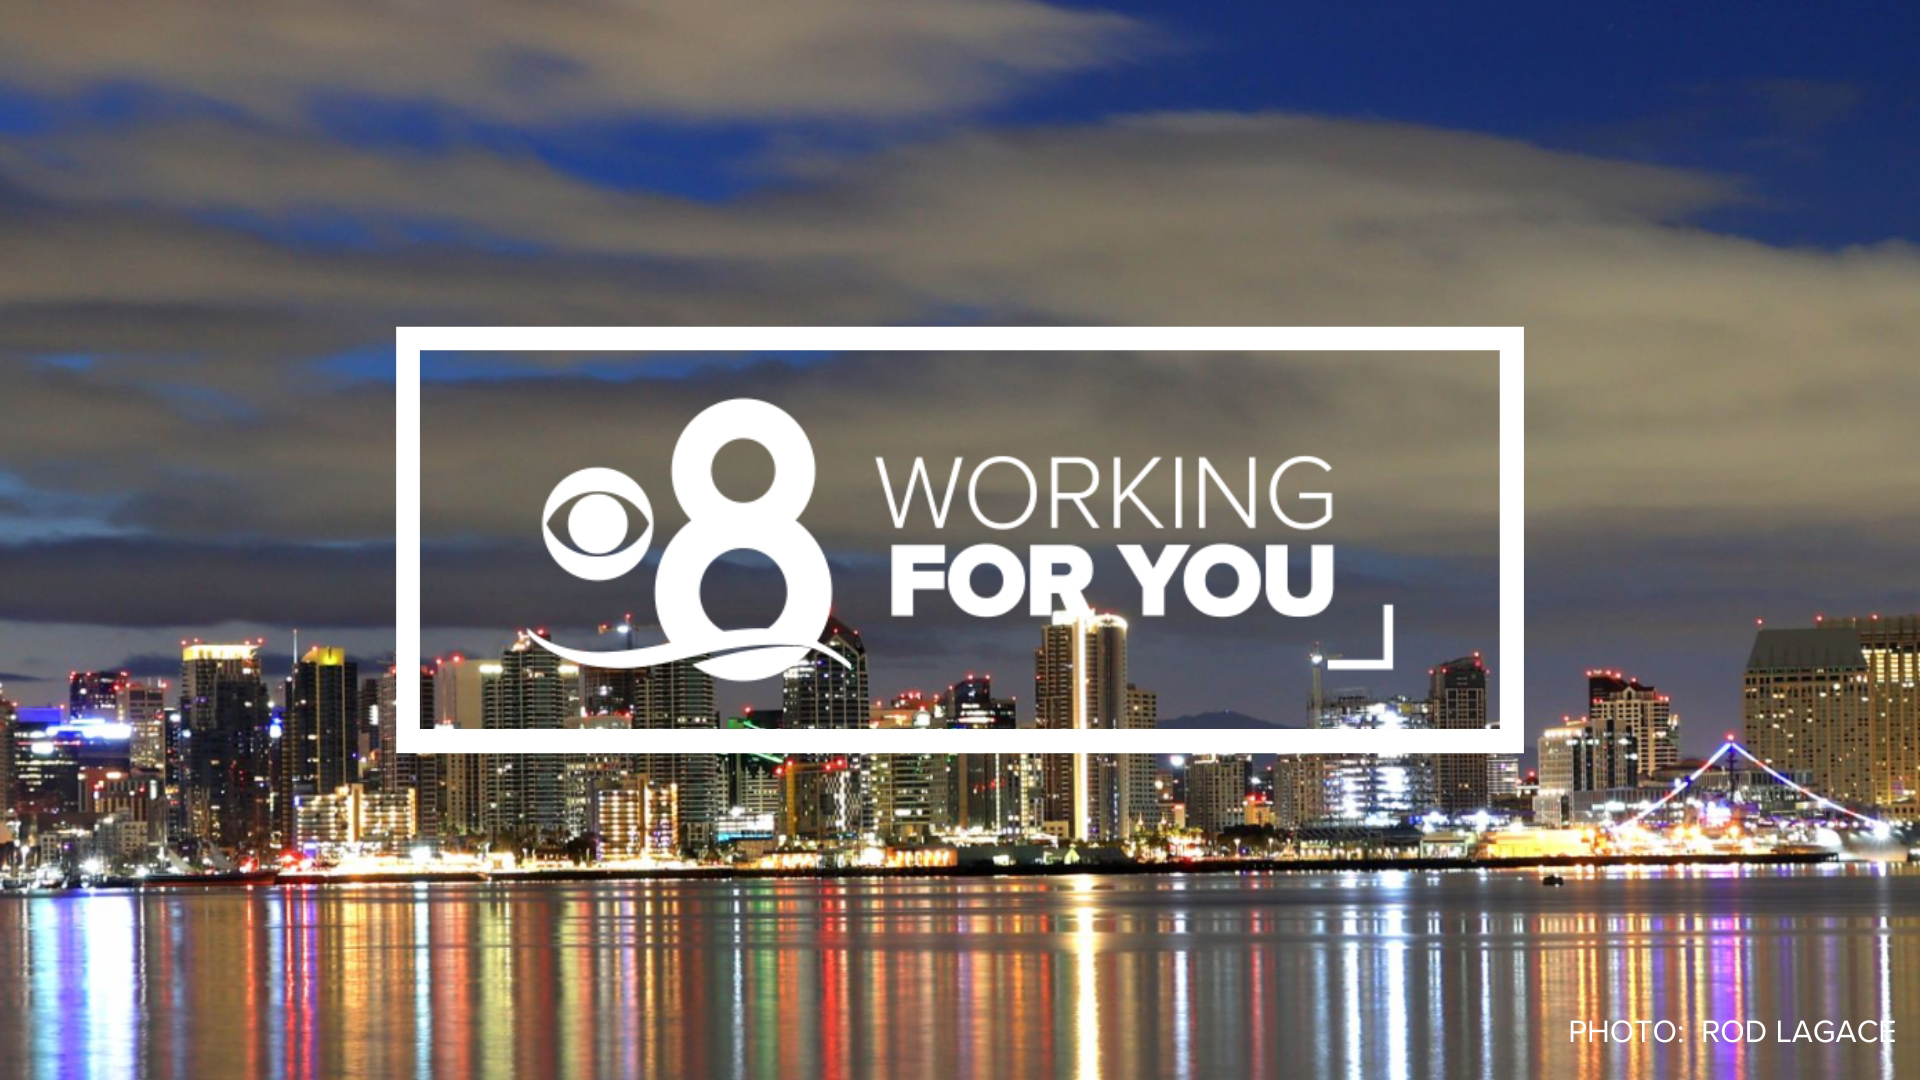 At CBS 8, we are always Working for You and our San Diego community. This video features some of the stories that you shared.